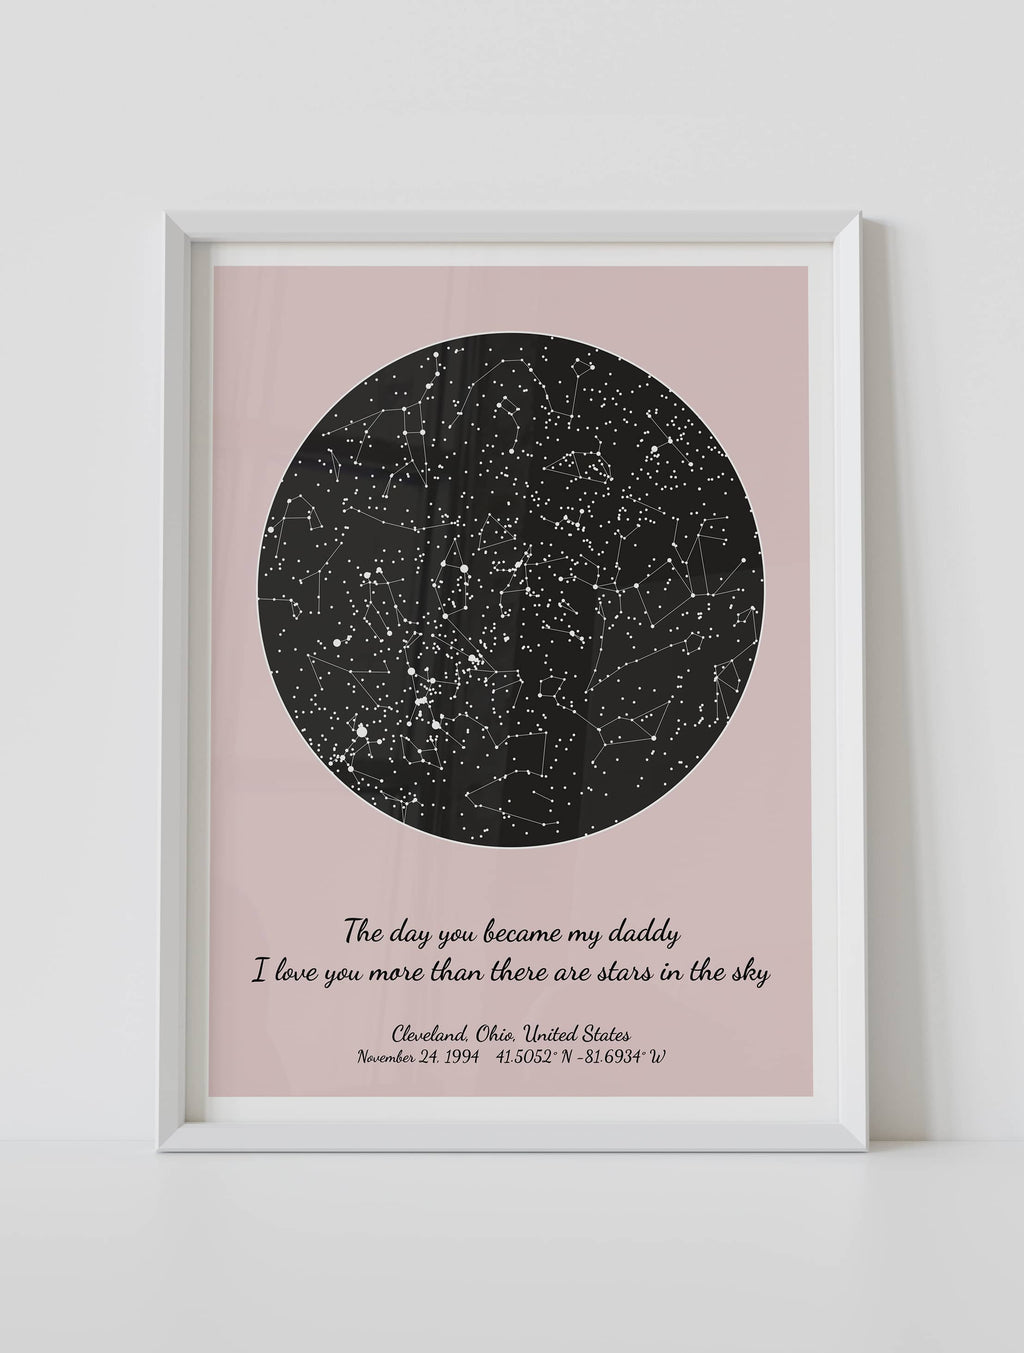 A framed pink circle custom star map poster featuring a specific date and location